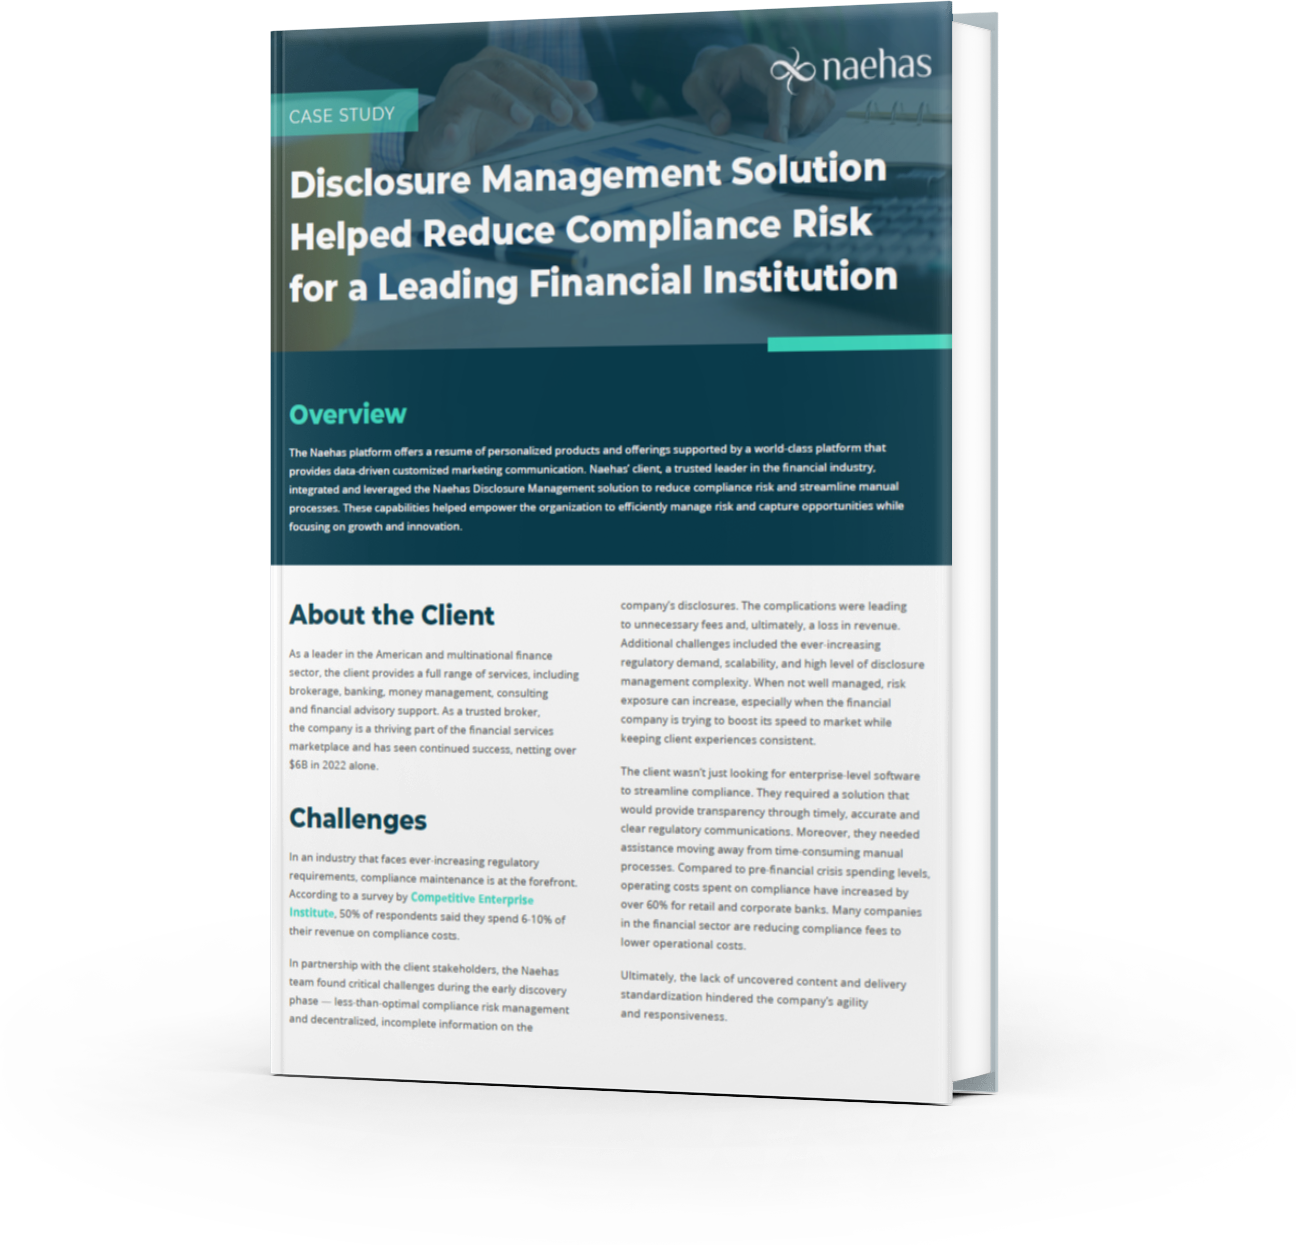 Case Study Disclosure Mgt Reduce Compliance Risk cover standing